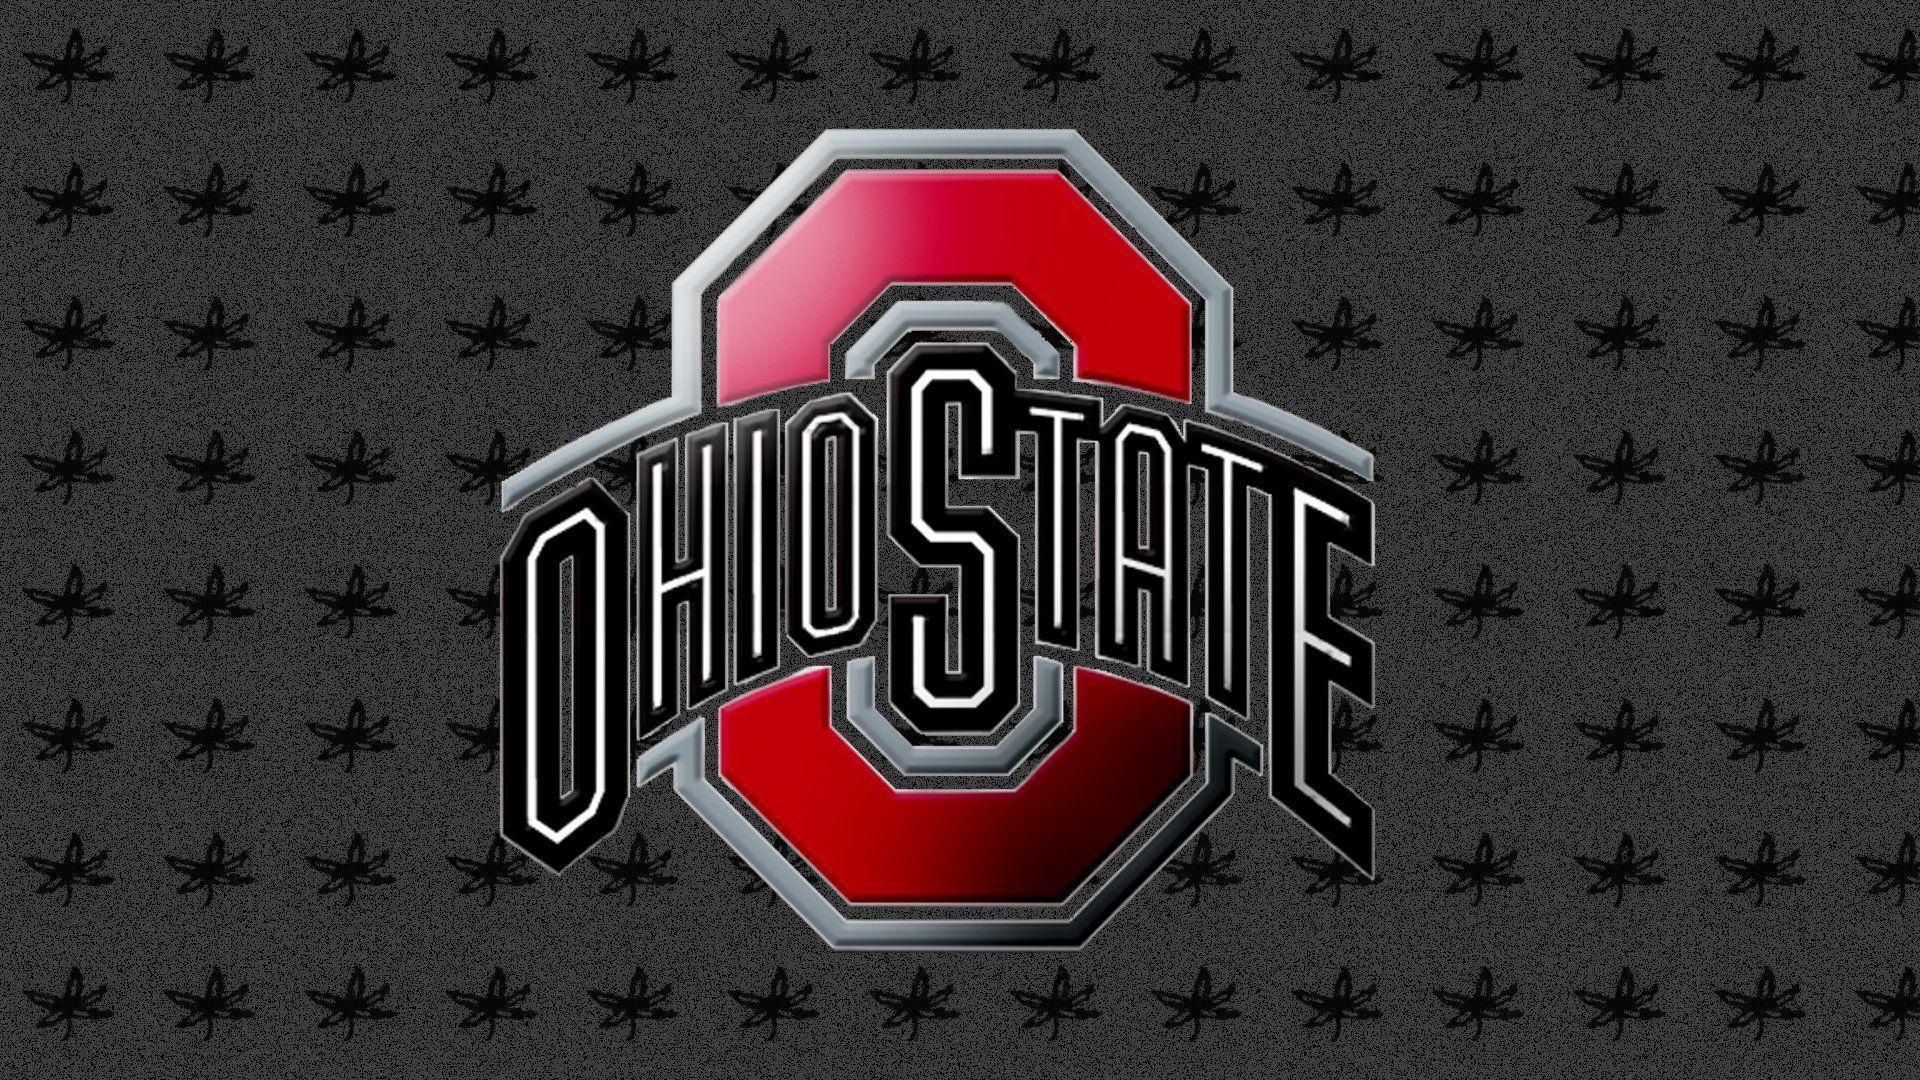 Ohio State Buckeyes Football Wallpapers Wallpaper Cave HD Wallpapers Download Free Images Wallpaper [wallpaper981.blogspot.com]